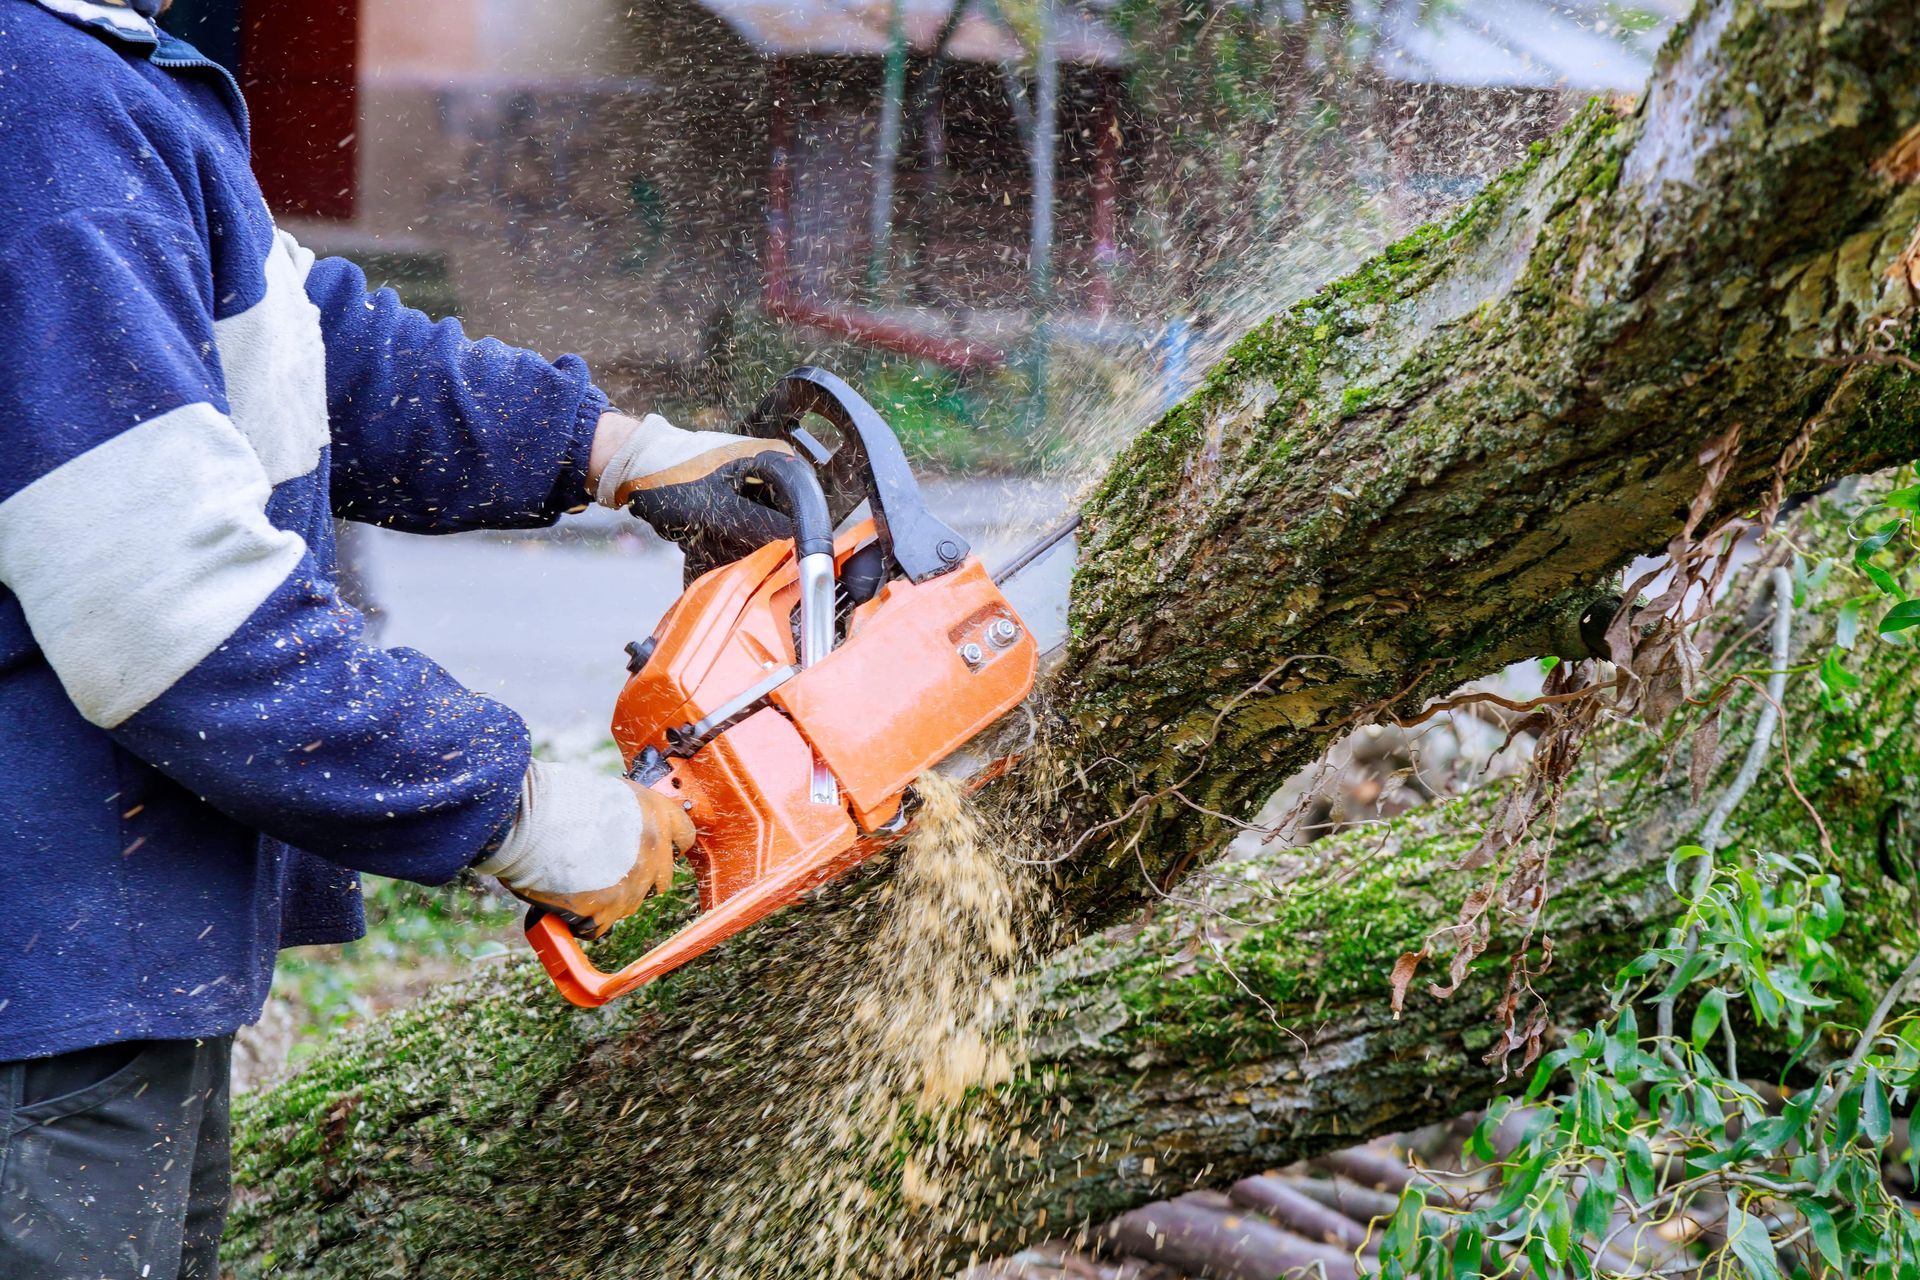 Ample experience with a chainsaw